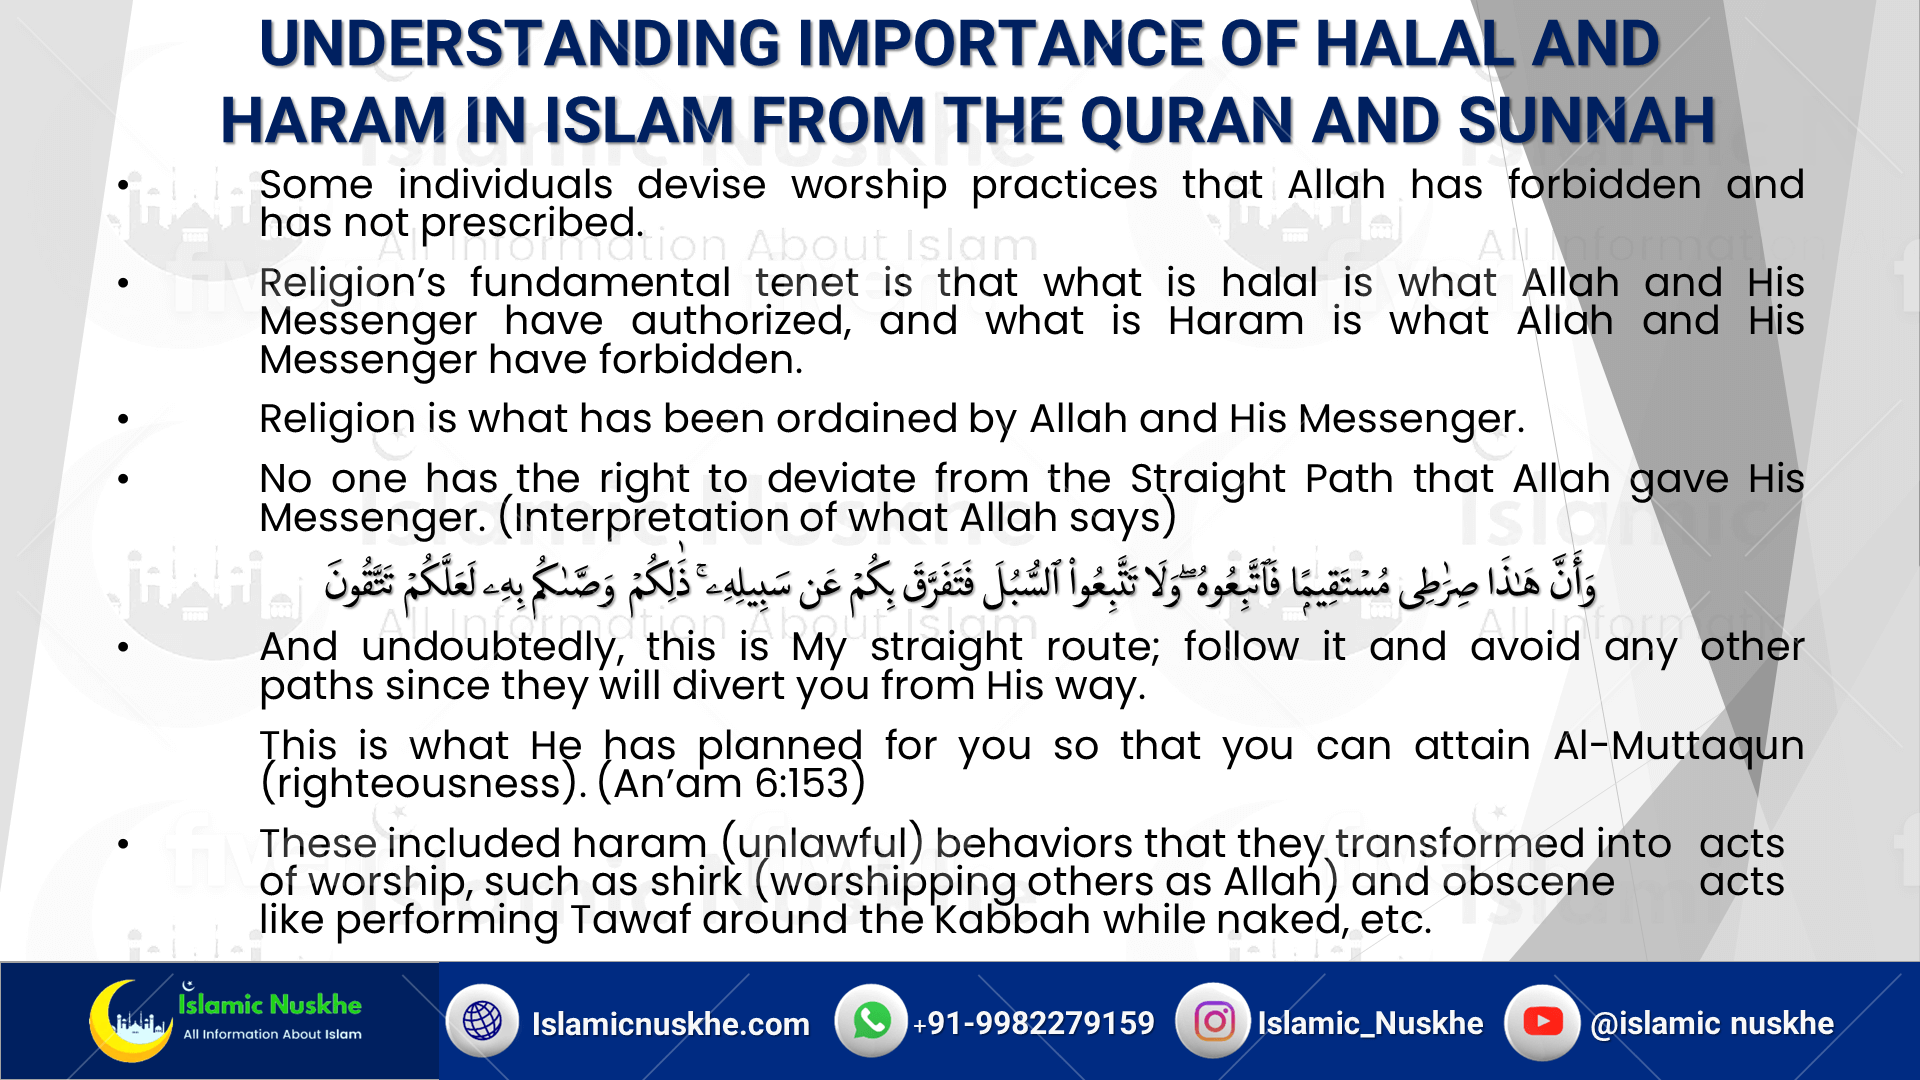 IMPORTANCE OF HALAL AND HARAM IN ISLAM (2023)